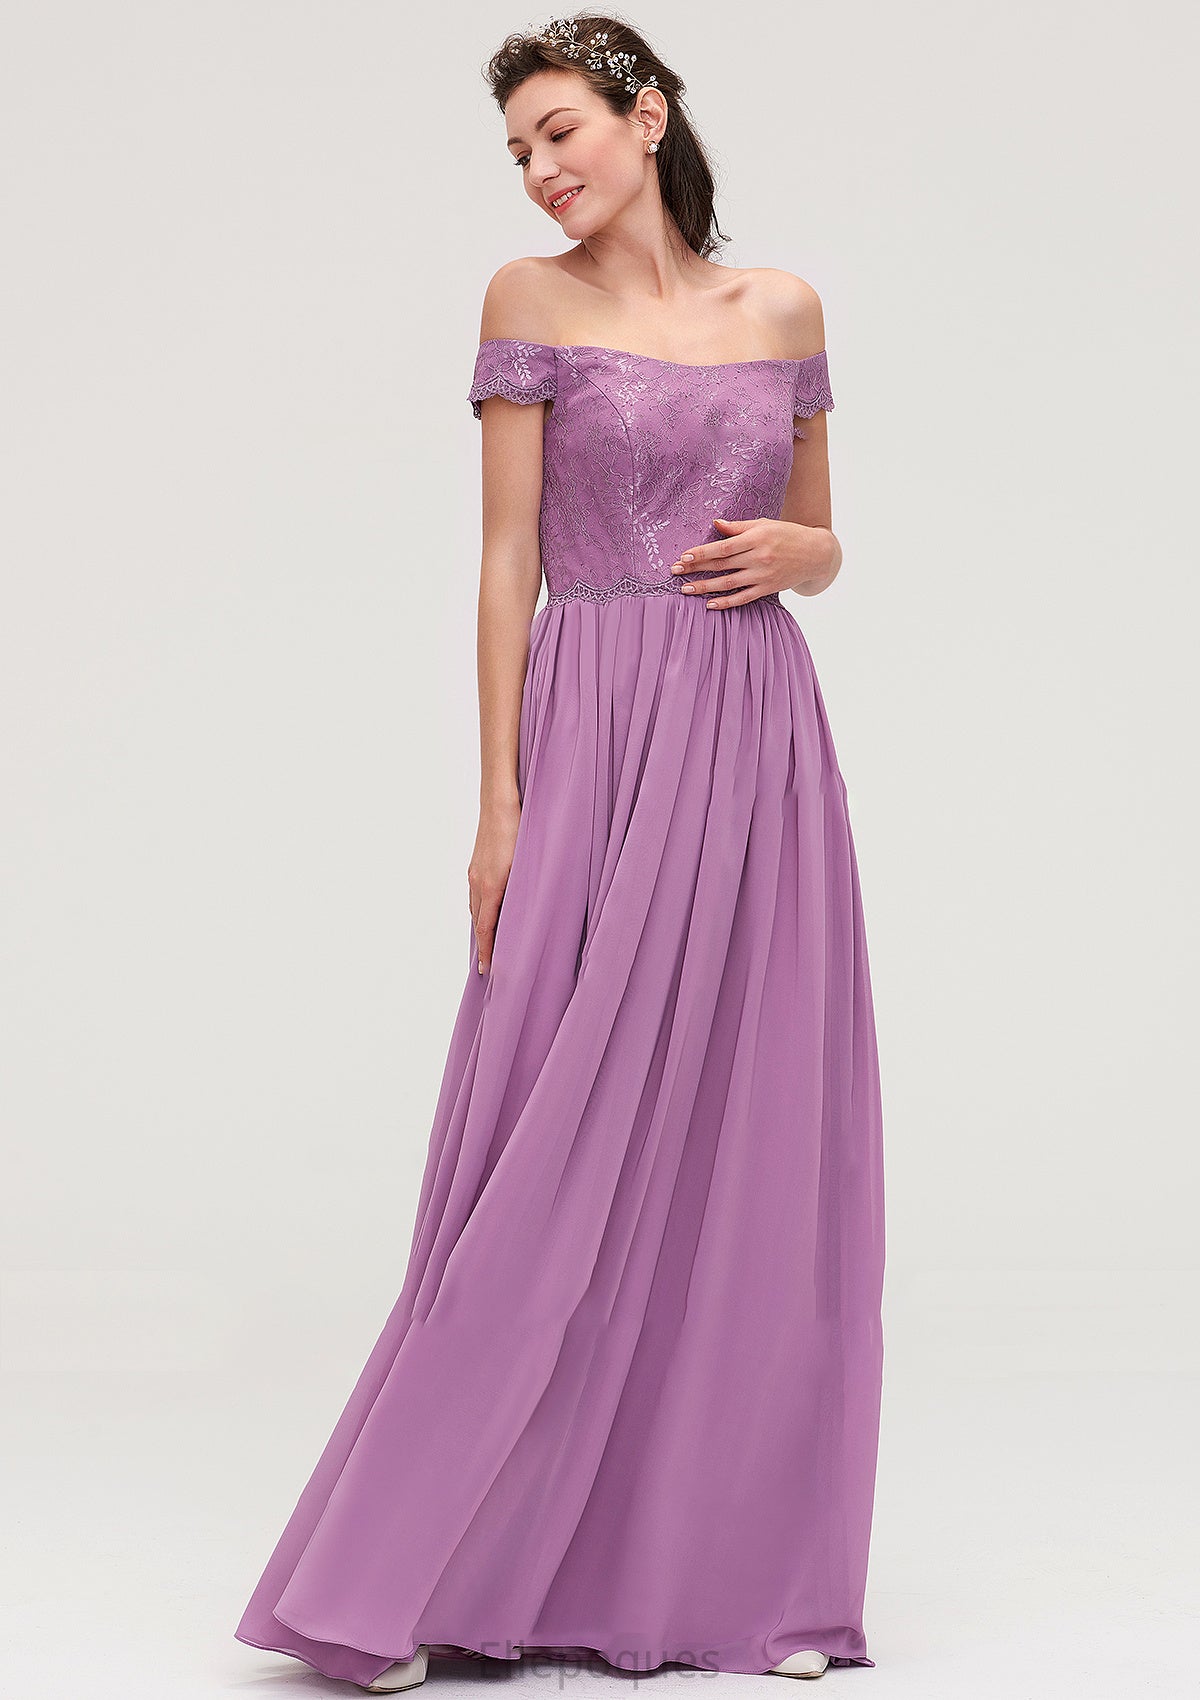 Sleeveless Off-the-Shoulder Long/Floor-Length Chiffon A-line/Princess Bridesmaid Dresseses With Appliqued Violet HOP0025442